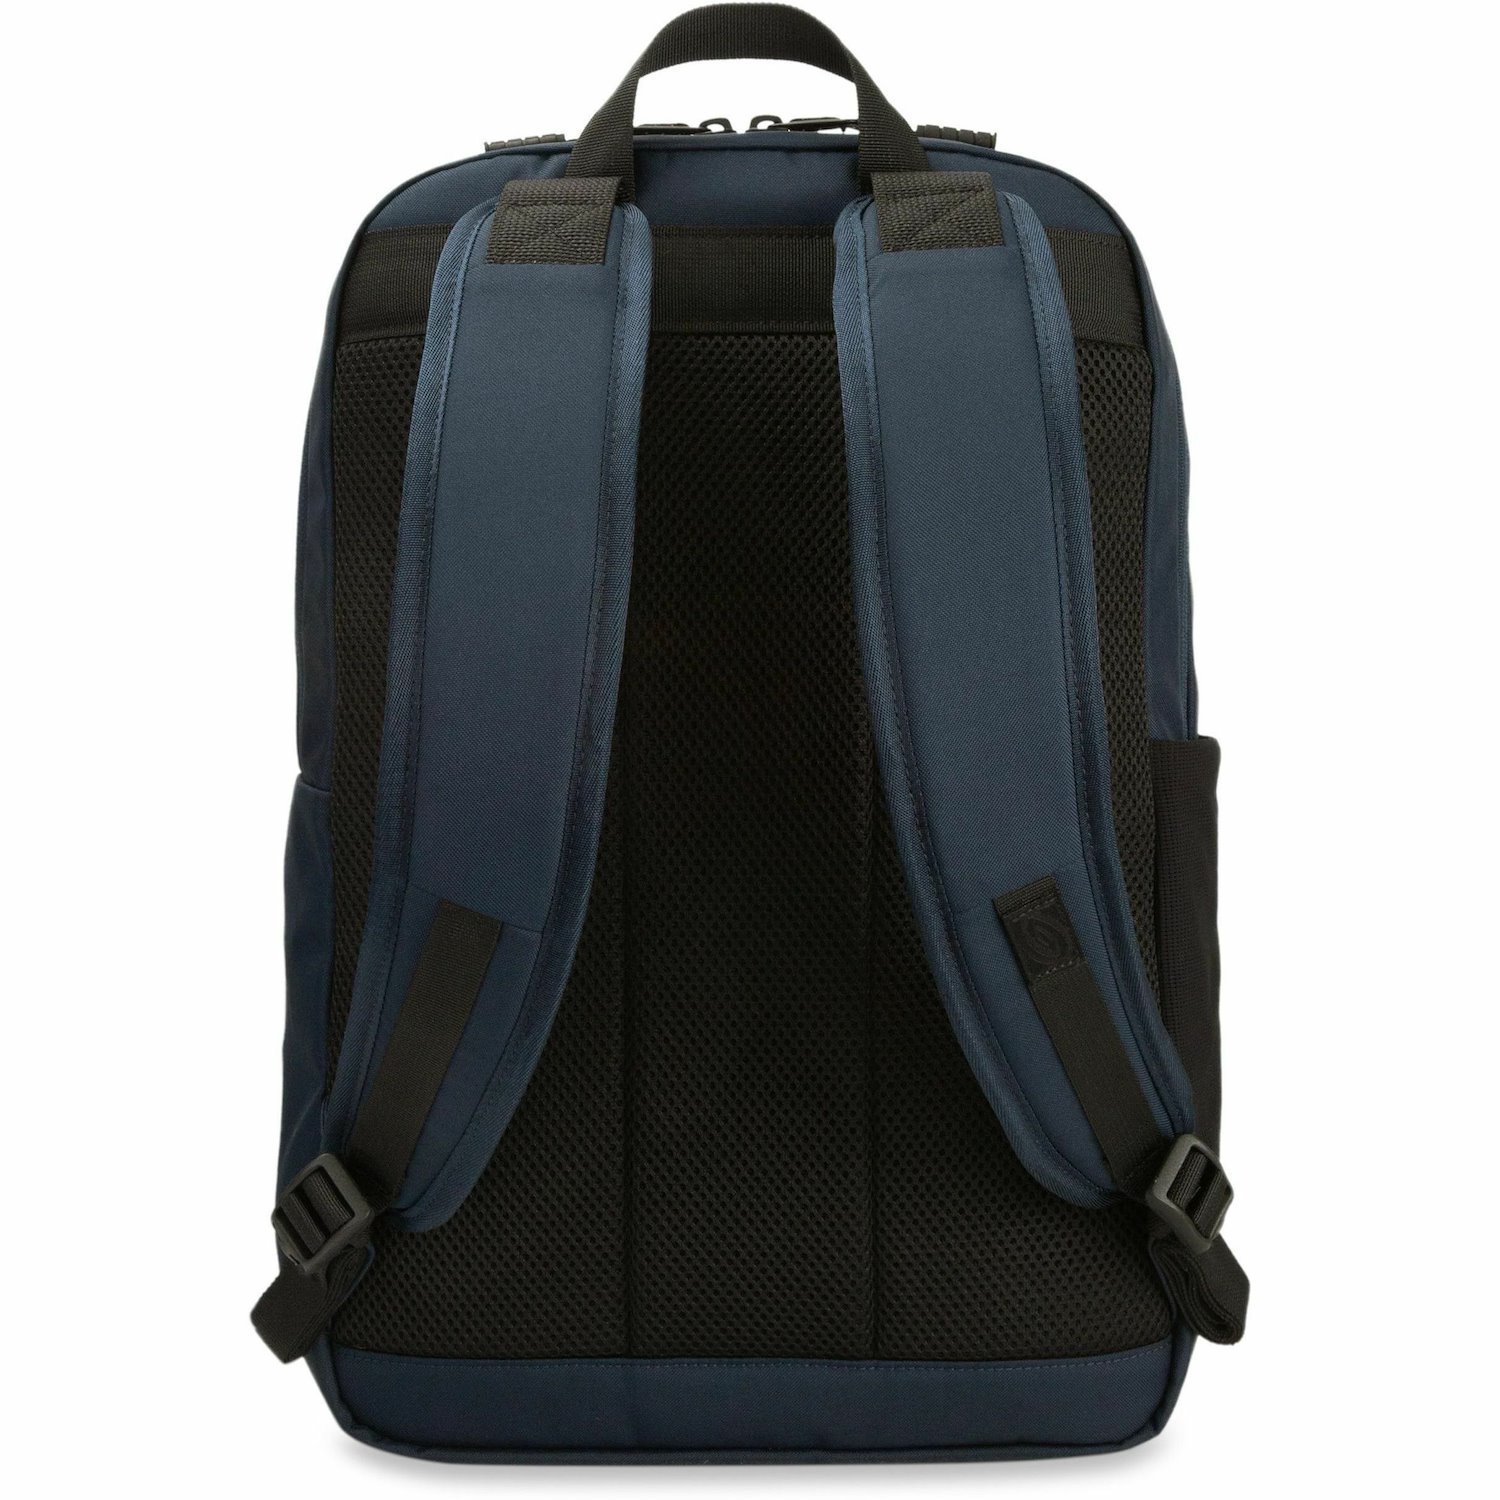 Timbuk2 Parkside Carrying Case (Backpack) for 15" Apple iPad Notebook, Tablet, Headphone, Smartphone, Accessories - Eco Nautical